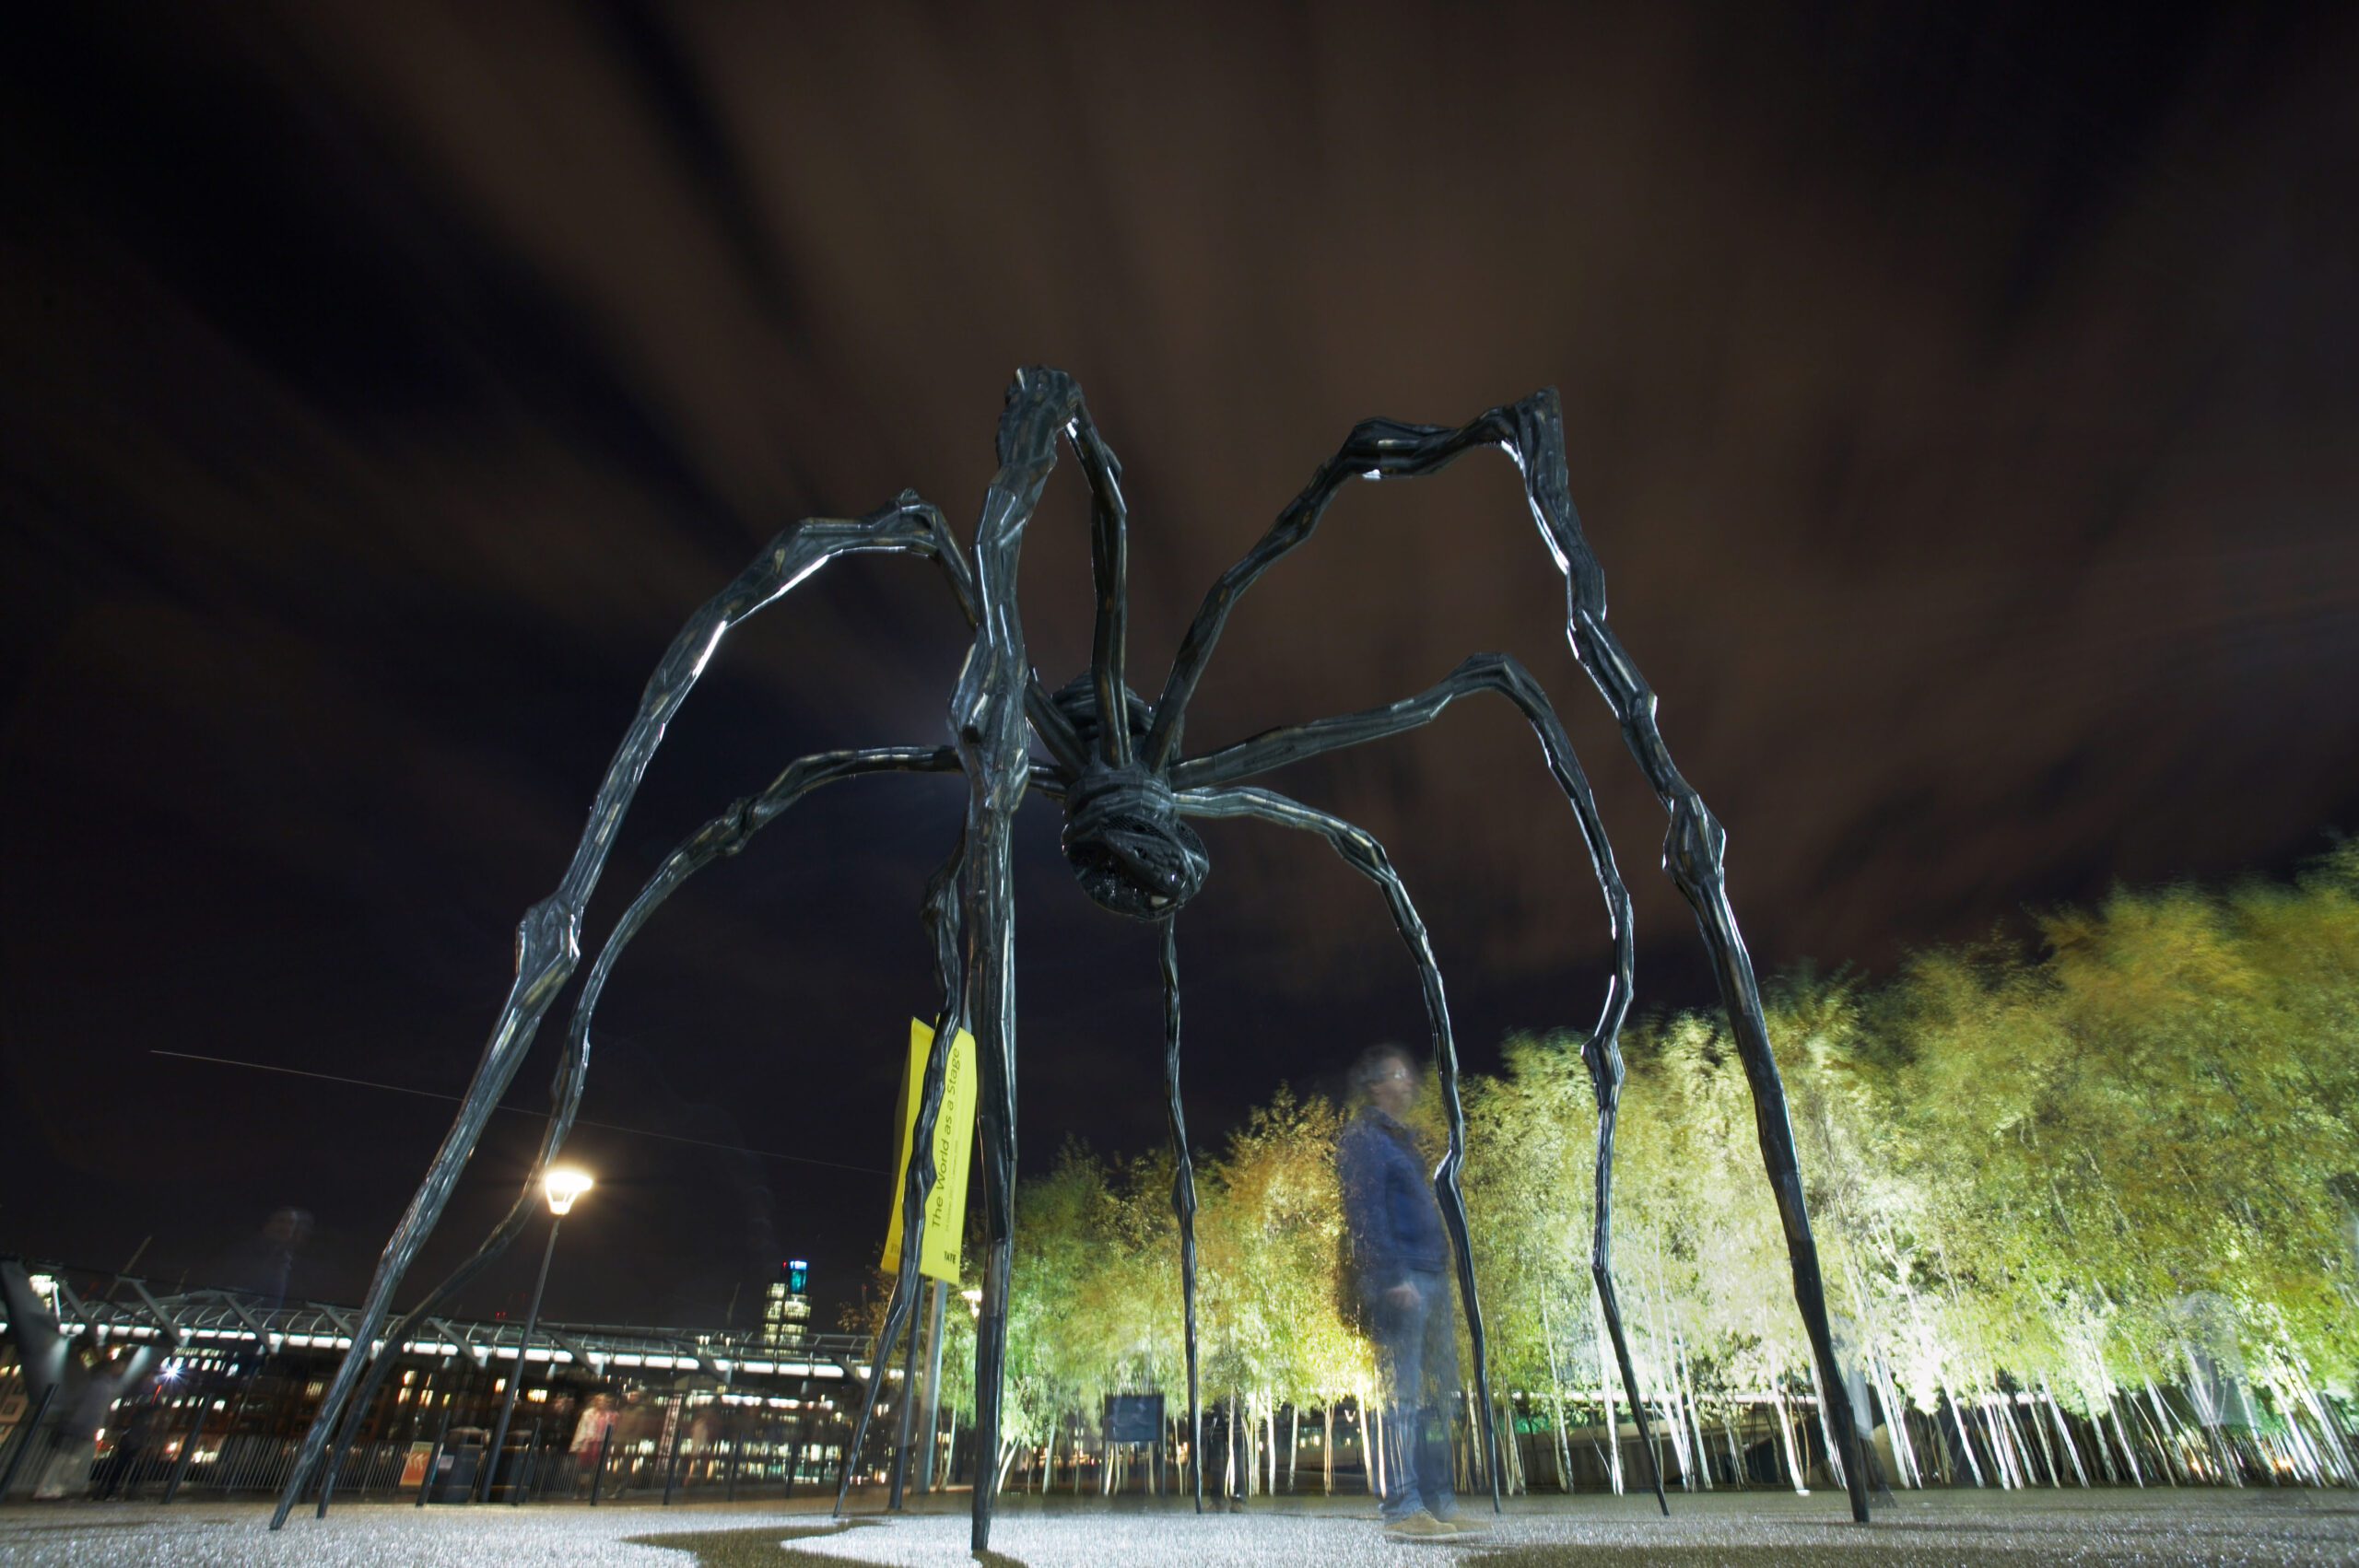 Louise Bourgeois Spider Sculpture at Tate Modern in London England UK. DBURKE / Alamy Stock Photo